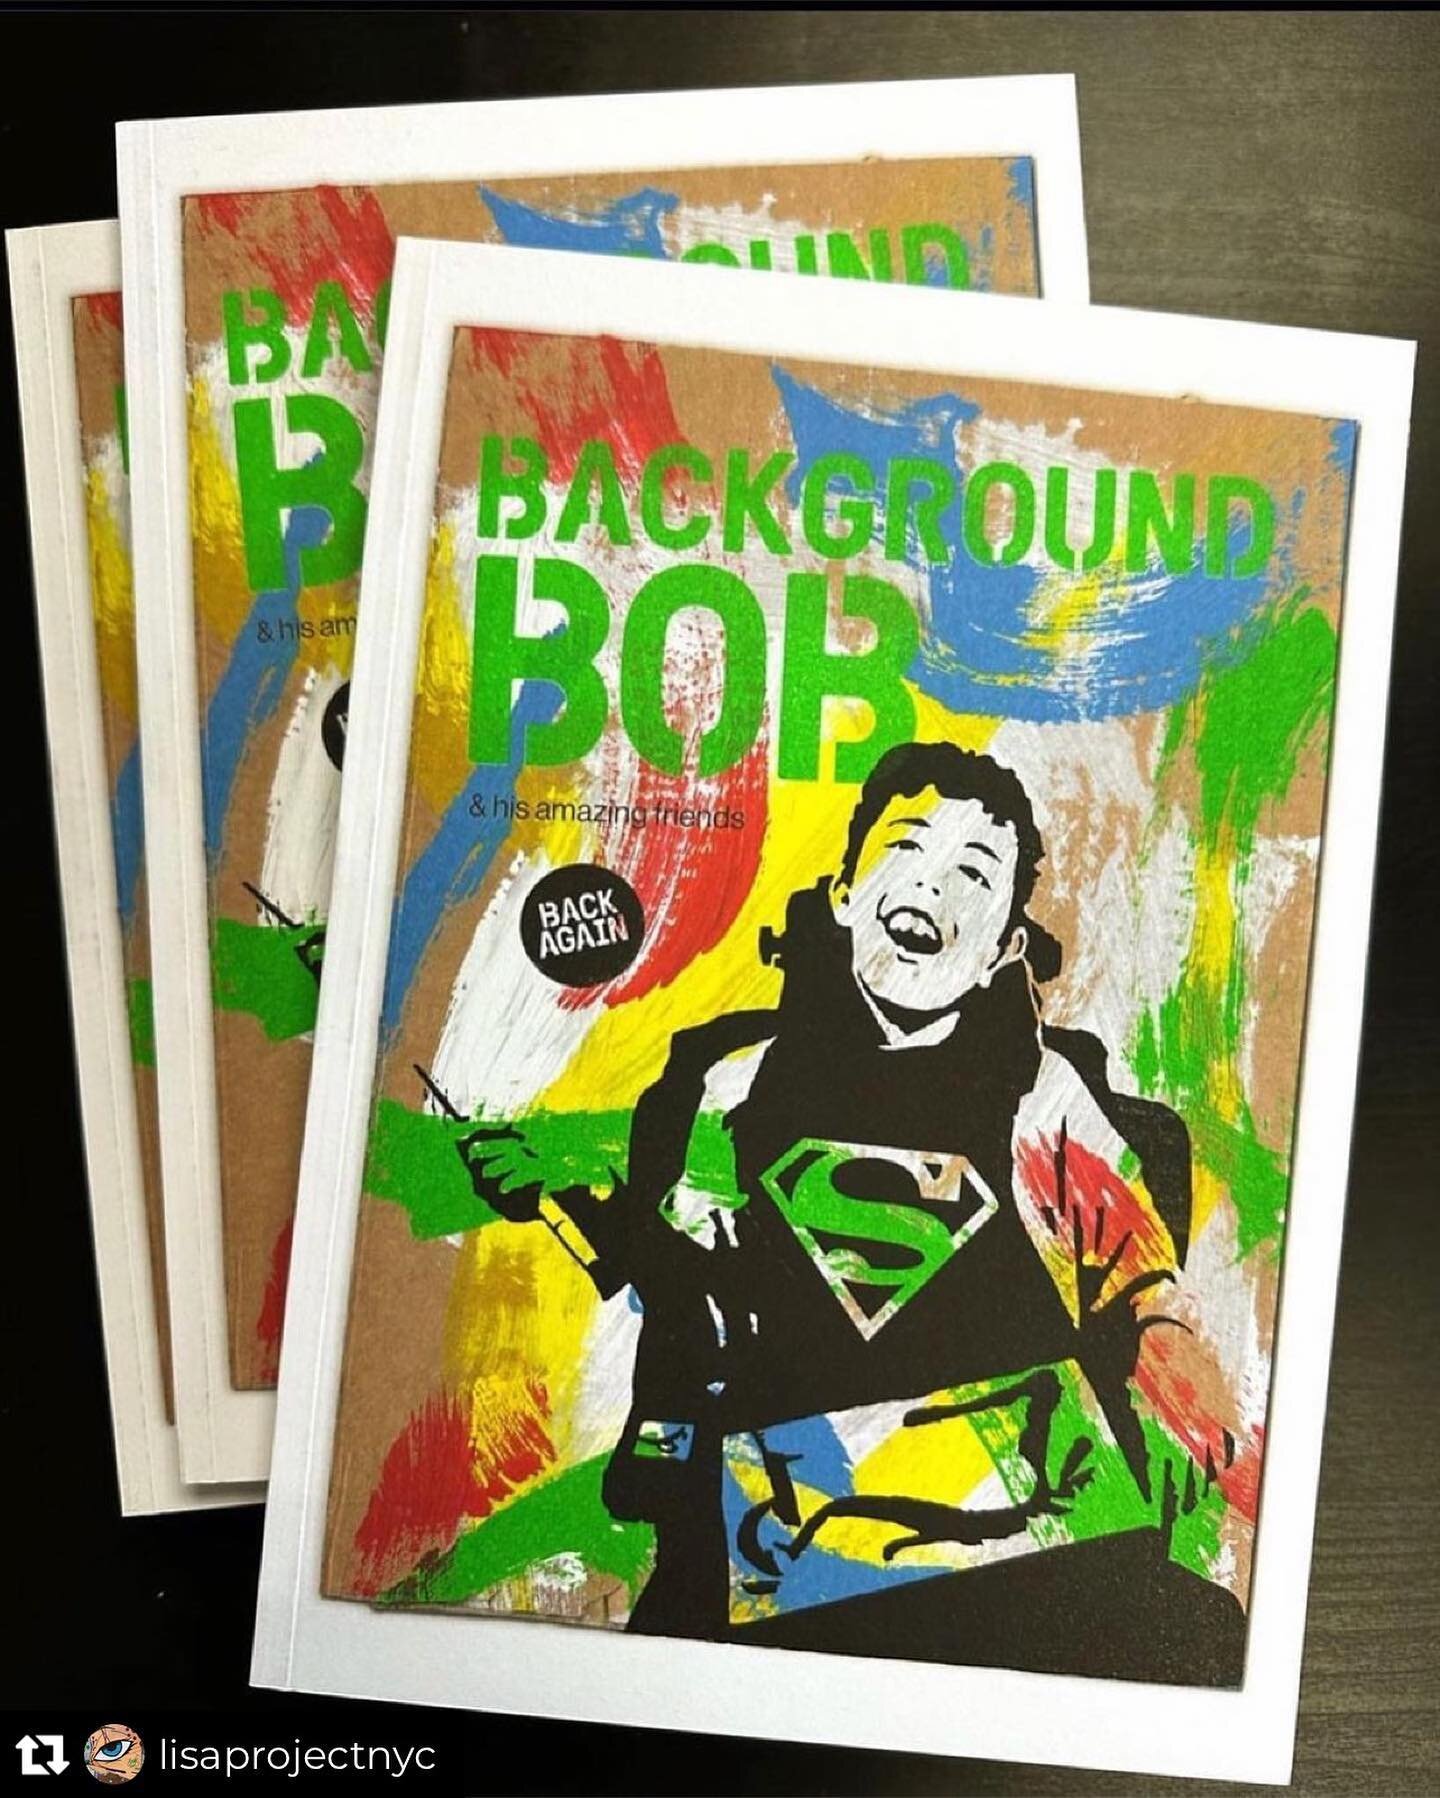 Repost from @lisaprojectnyc
&bull;
Have you met our pal, the brilliant @background_bob ❓And seen his amazing books of the finest art , by his art friends⁉️ Cause he&rsquo;s got really cool art friends, ya dig❓I knew you did:)))
Weeeellll then‼️
Just 